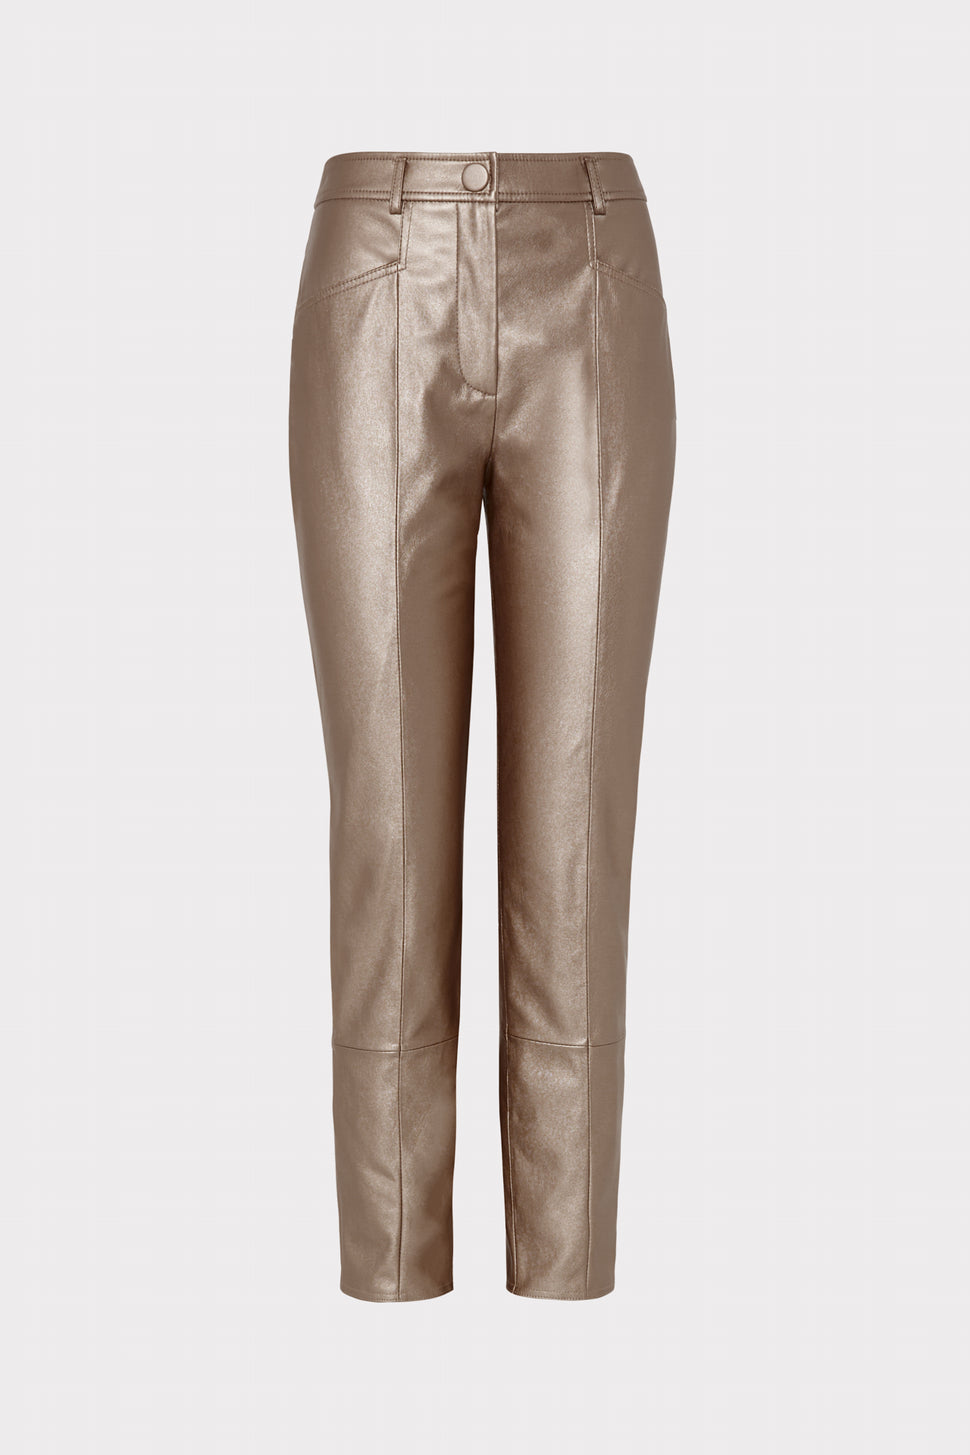 womens brown leather pants